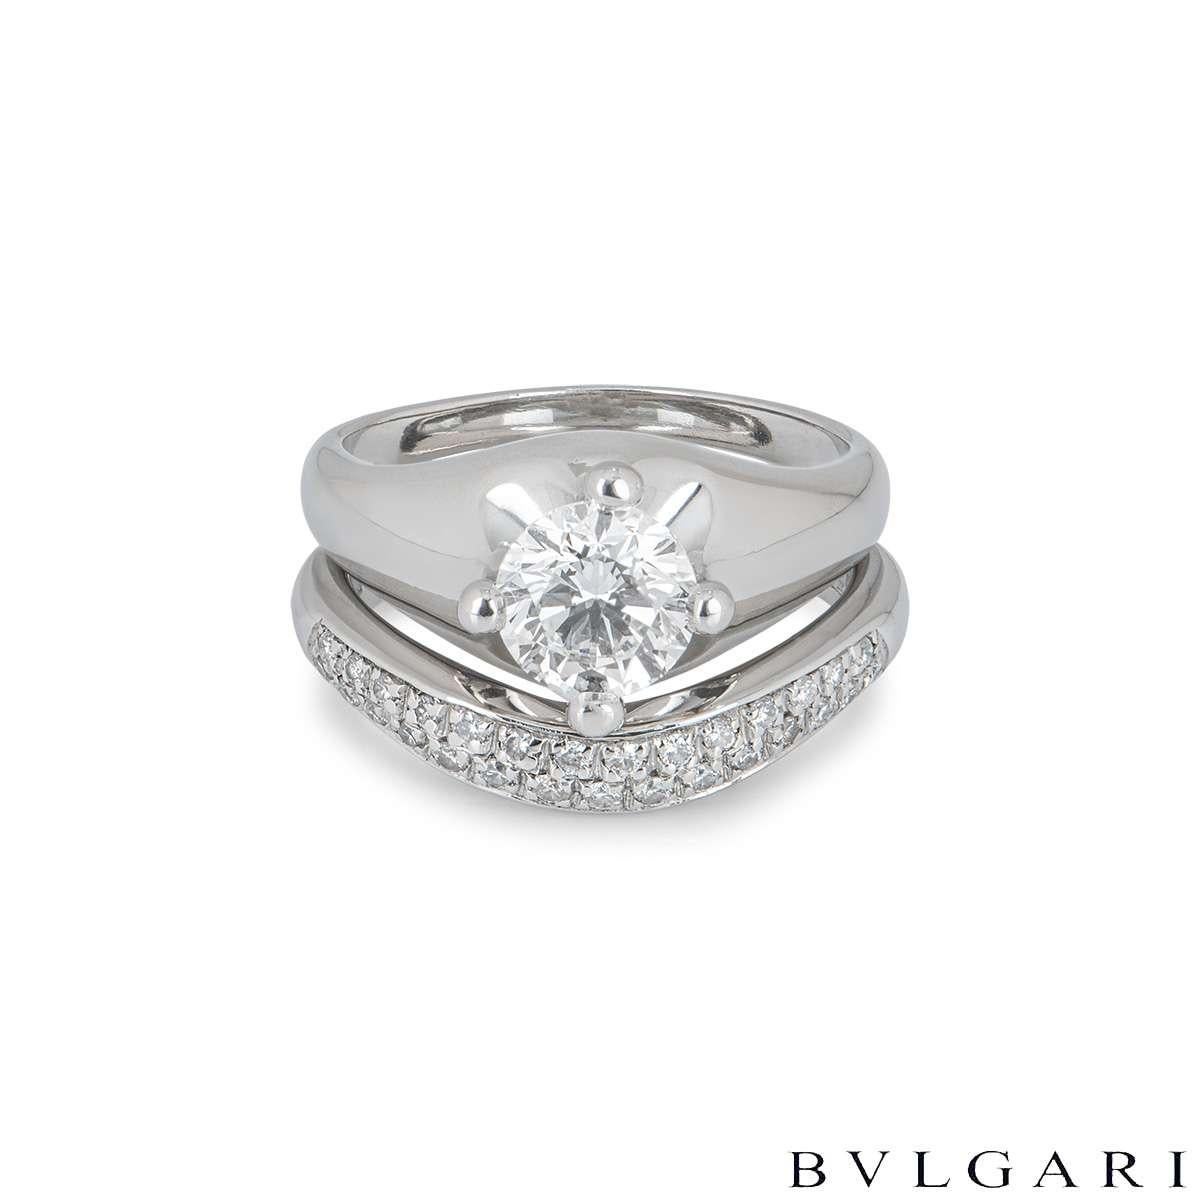 A stunning platinum Bulgari diamond engagement ring and wedding band set from the Corona collection. The engagement ring is set to the centre with a 1.00ct round brilliant cut diamond in a raised four claw compass setting, G colour and VVS2 clarity.